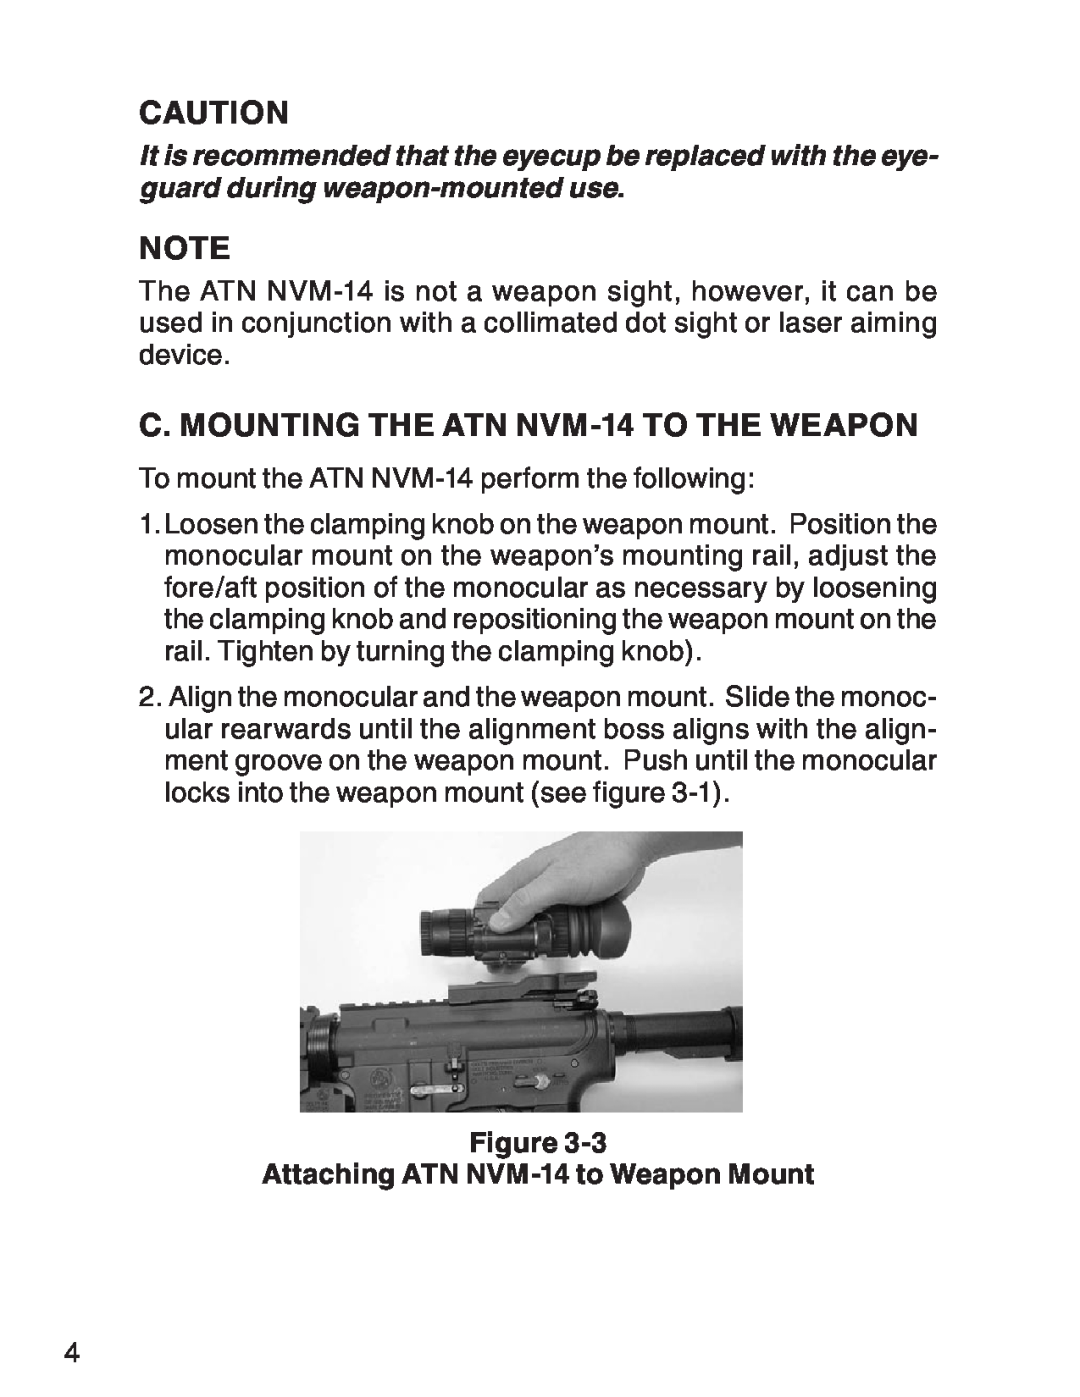 ATN 3 manual C. Mounting the ATN NVM-14 to the weapon, Attaching ATN NVM-14 to Weapon Mount 